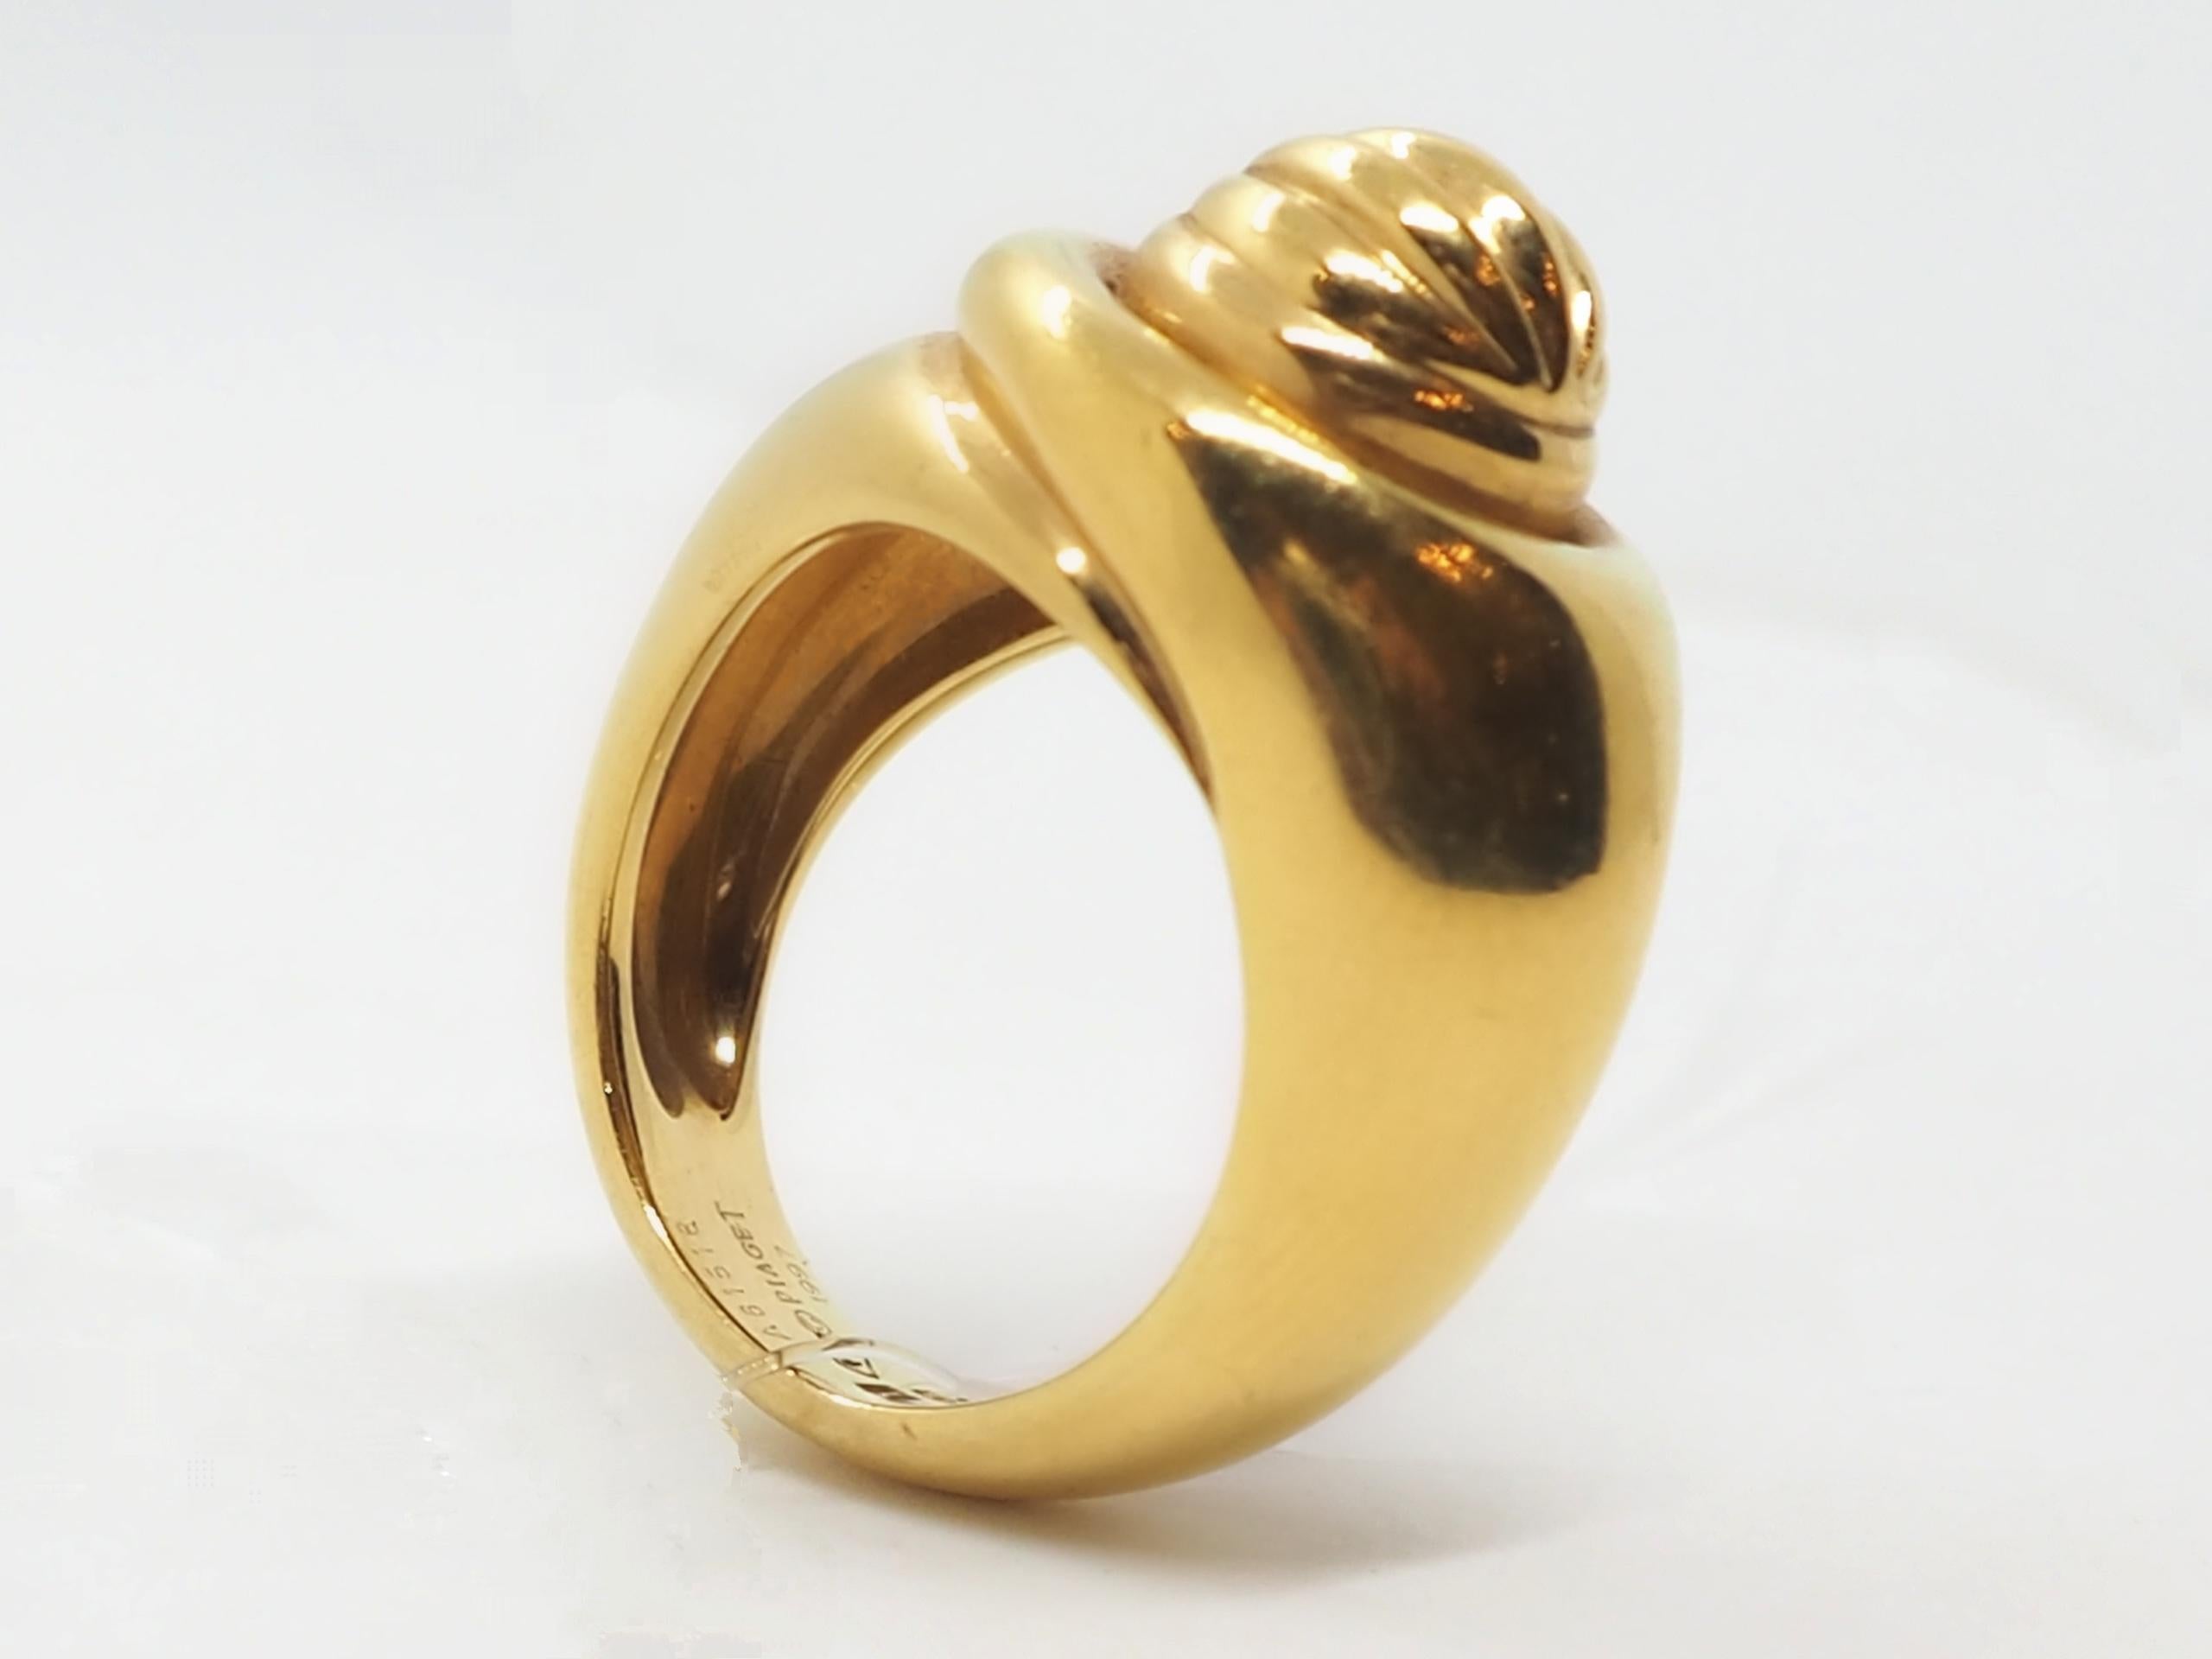 An elegant vintage Piaget ring in yellow gold  ​​from the 1990s, the center of the ring is  composed of a dynamic ball. Crafted in 18k yellow gold. Signed and numbered by Piaget. Despite the fact that it is a vintage ring it looks very relevant with